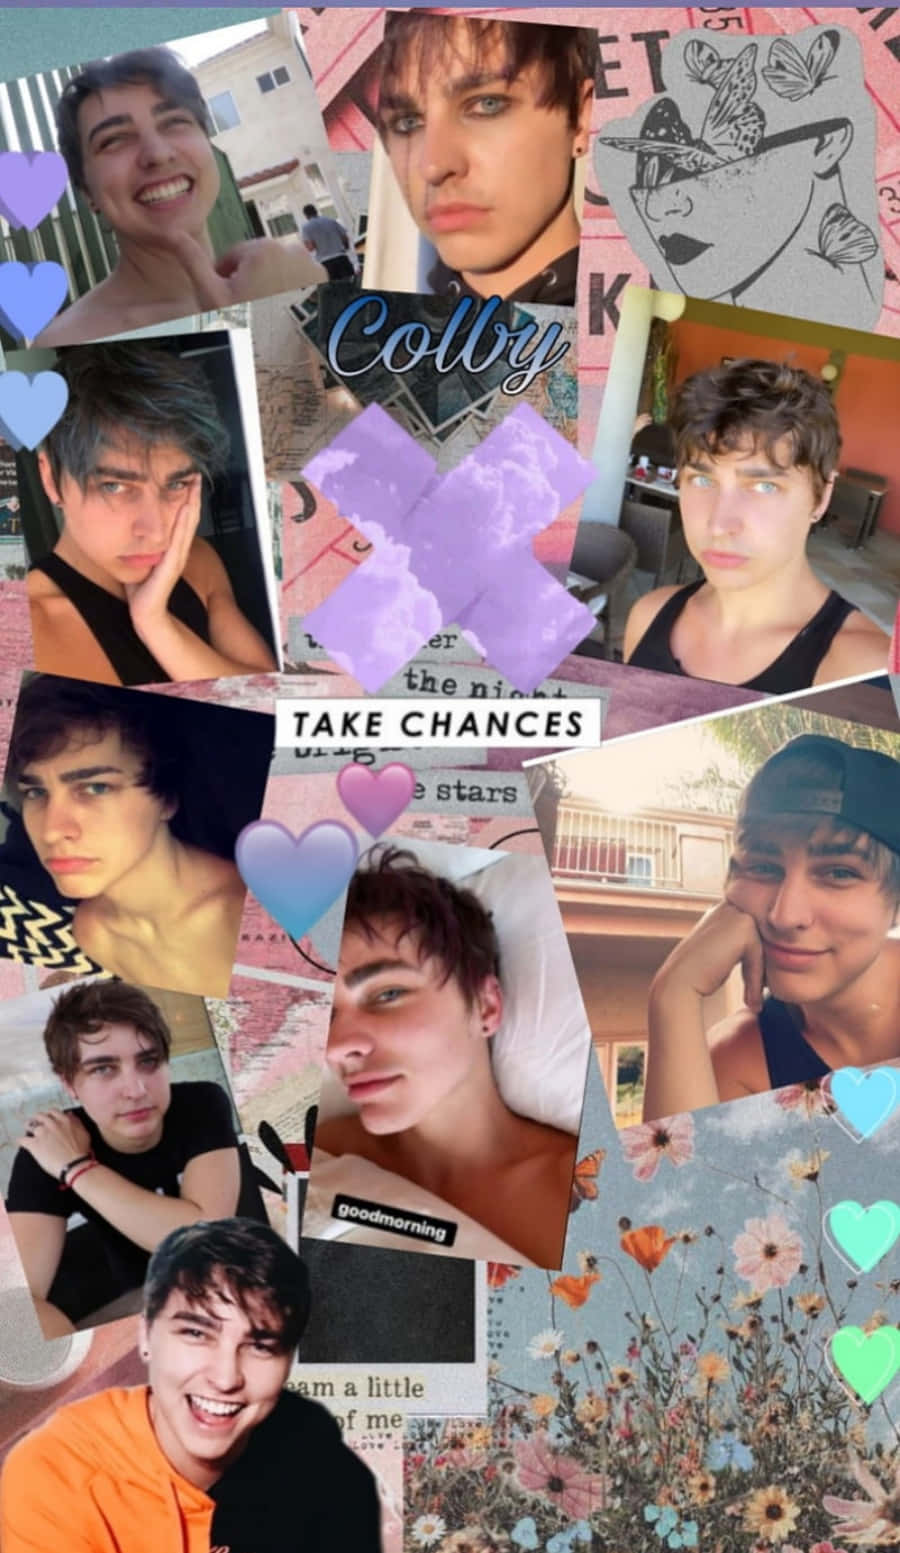 Collage Of Pictures Of A Boy With A Heart Wallpaper